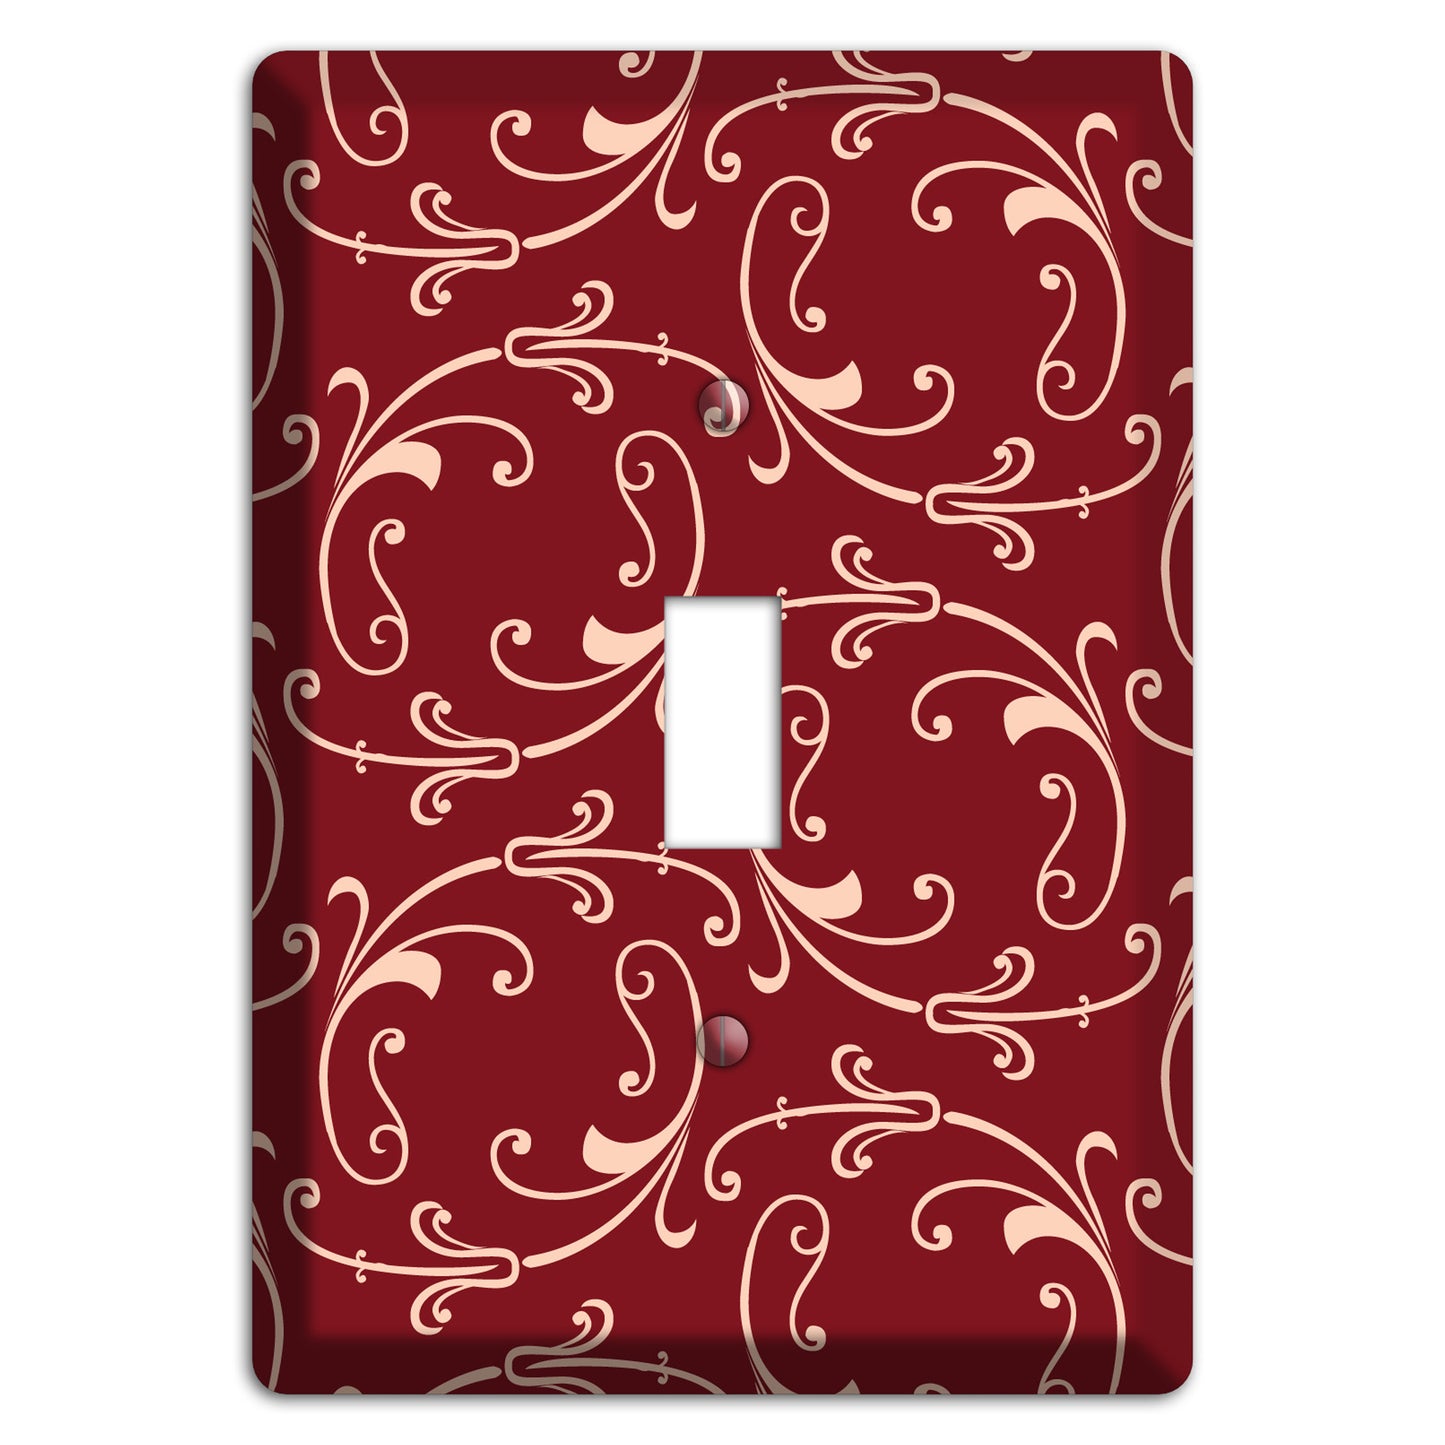 Burgundy Victorian Sprig Cover Plates